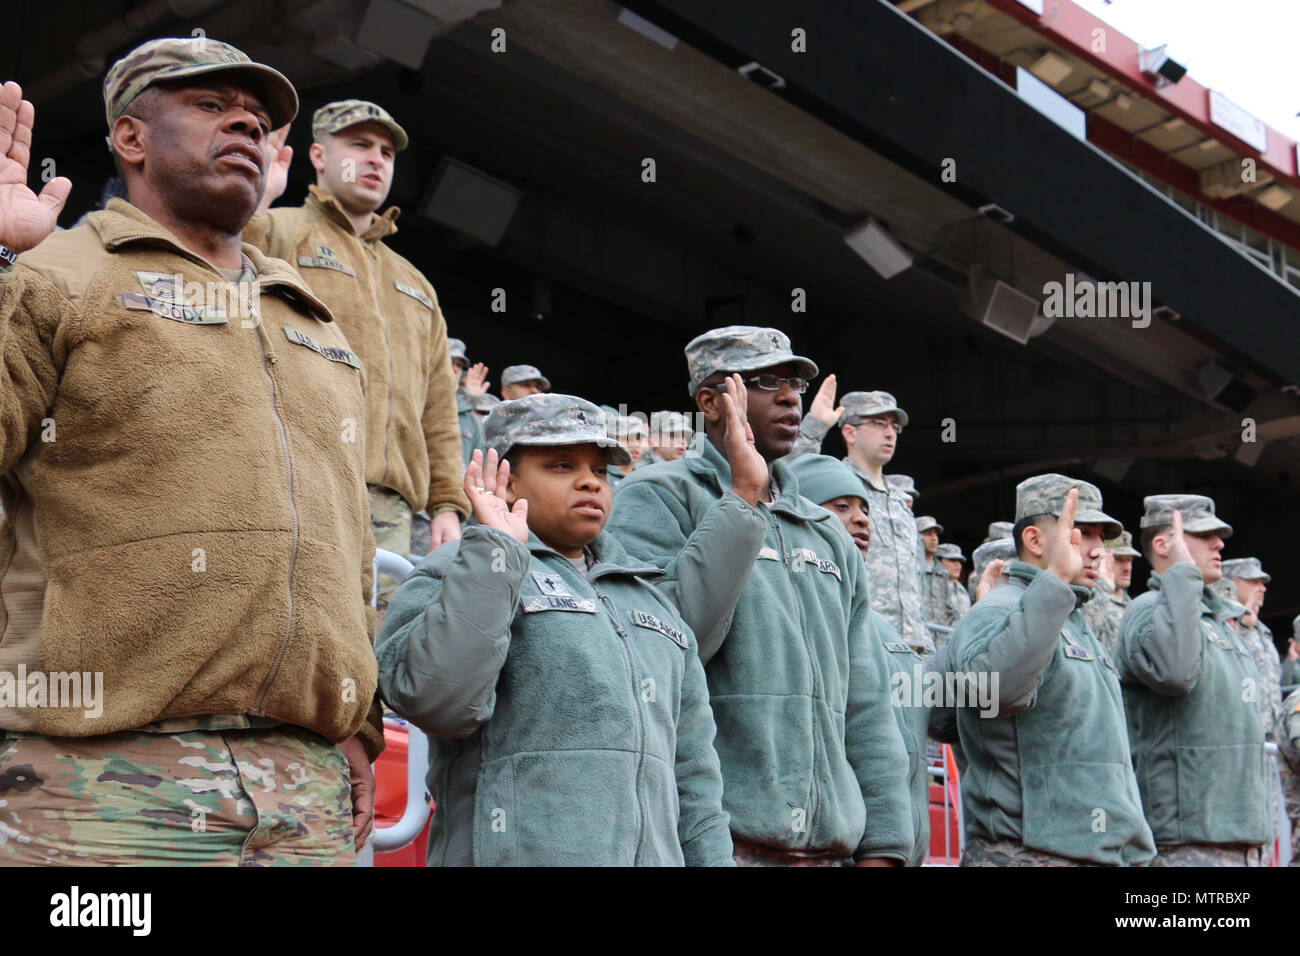 National Guard soldiers and airmen swear in as District of Columbia special police at FedEx Field in Landover, Md., Jan. 19, 2017. The National Guard members are here in preparation of the 58th Presidential Inauguration. During the historic event, National Guard troops from almost every state and territory will provide several critical functions including crowd management, traffic control, emergency services, logistics, and ceremonial marching elements. (U.S. Army National Guard photo by 2nd Lt. Wendy Callaway) Stock Photo